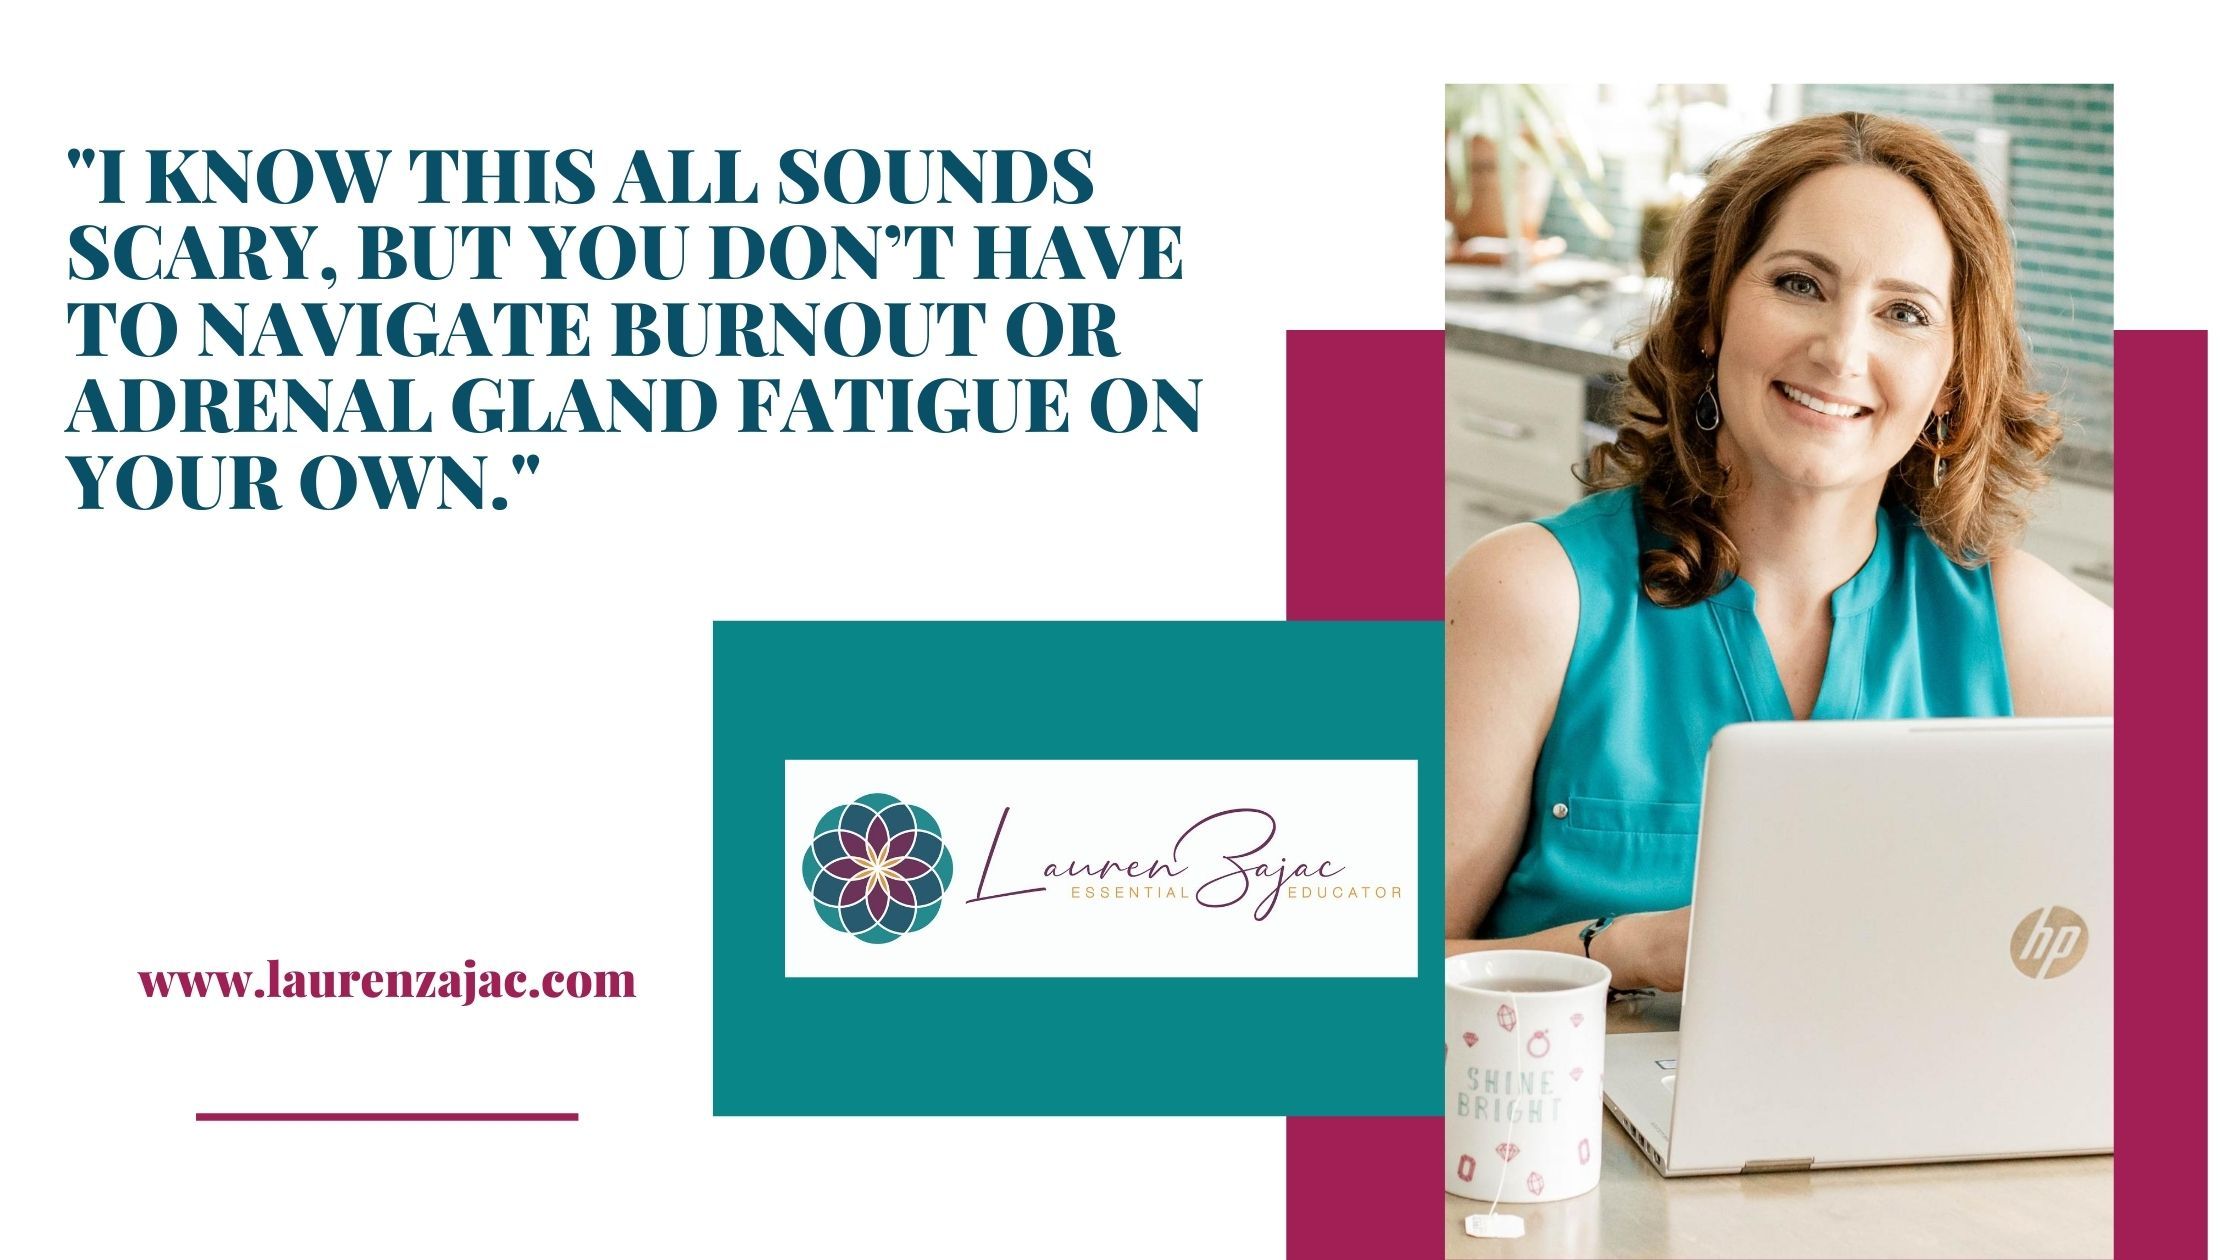 _I know this all sounds scary, but you don’t have to navigate burnout or adrenal gland fatigue on your own._ (2)